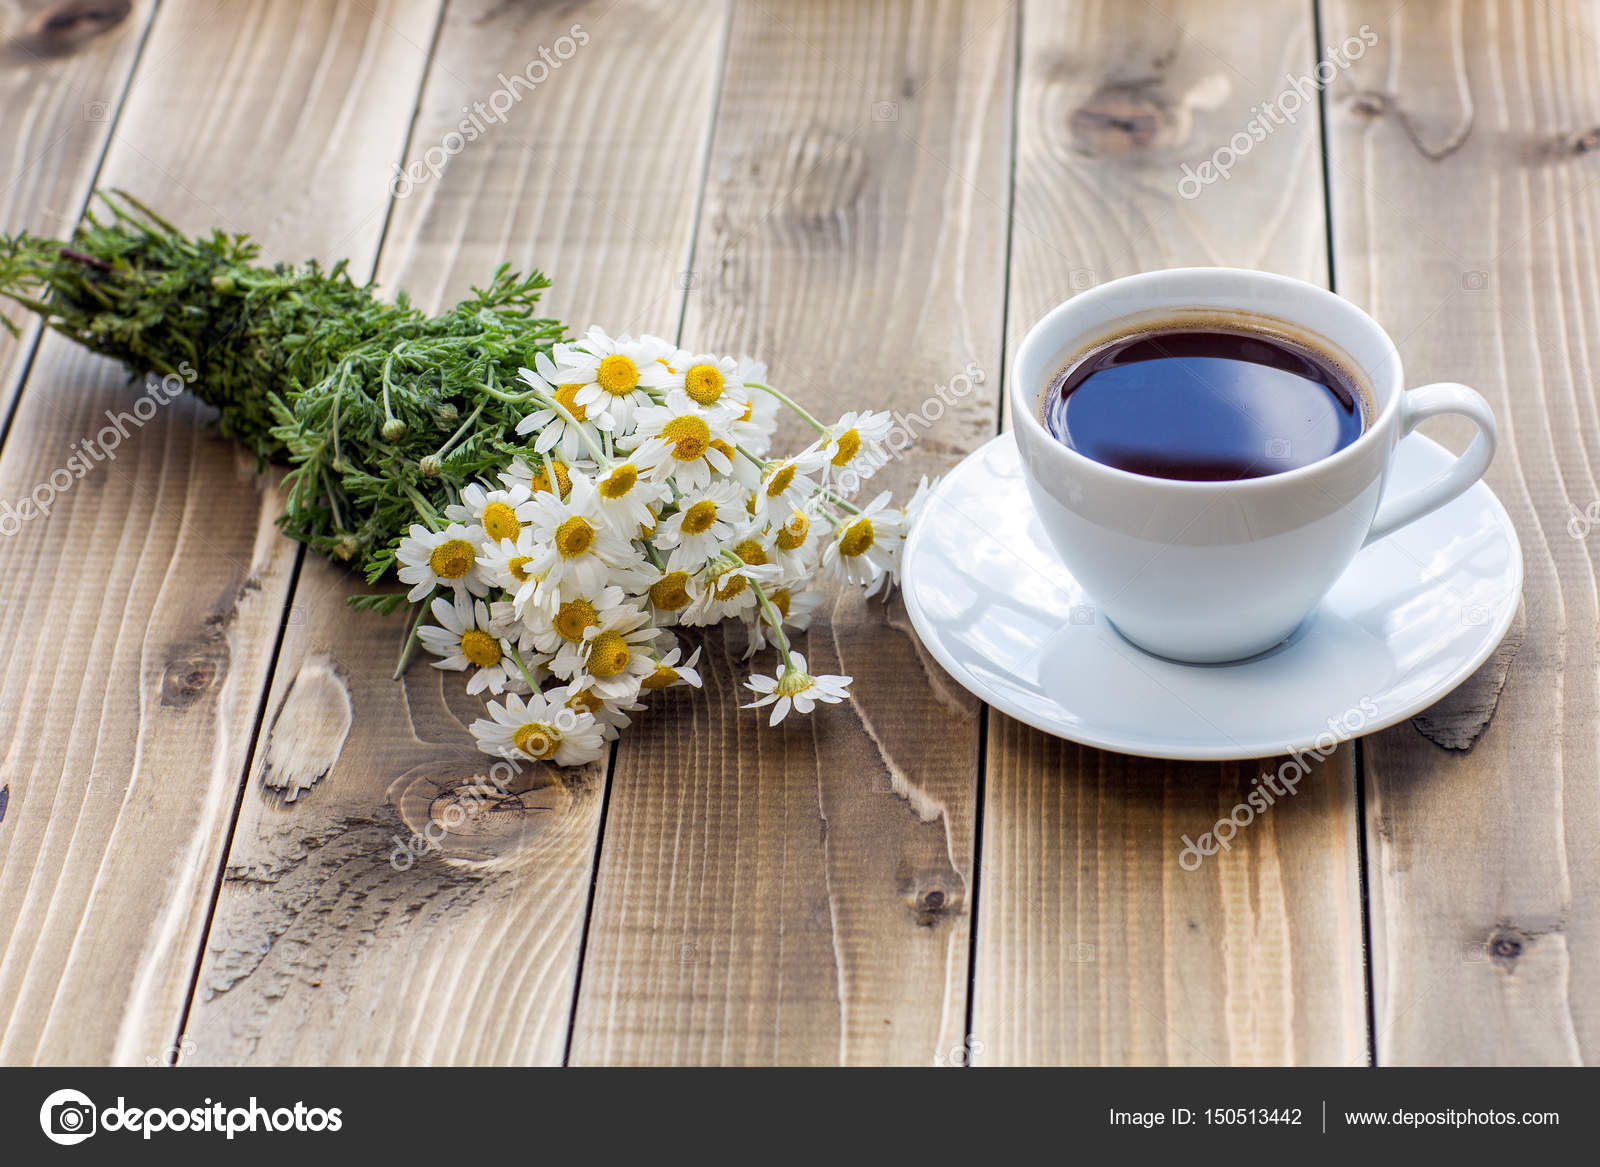 Coffee cup with White flower decoration on wooden table